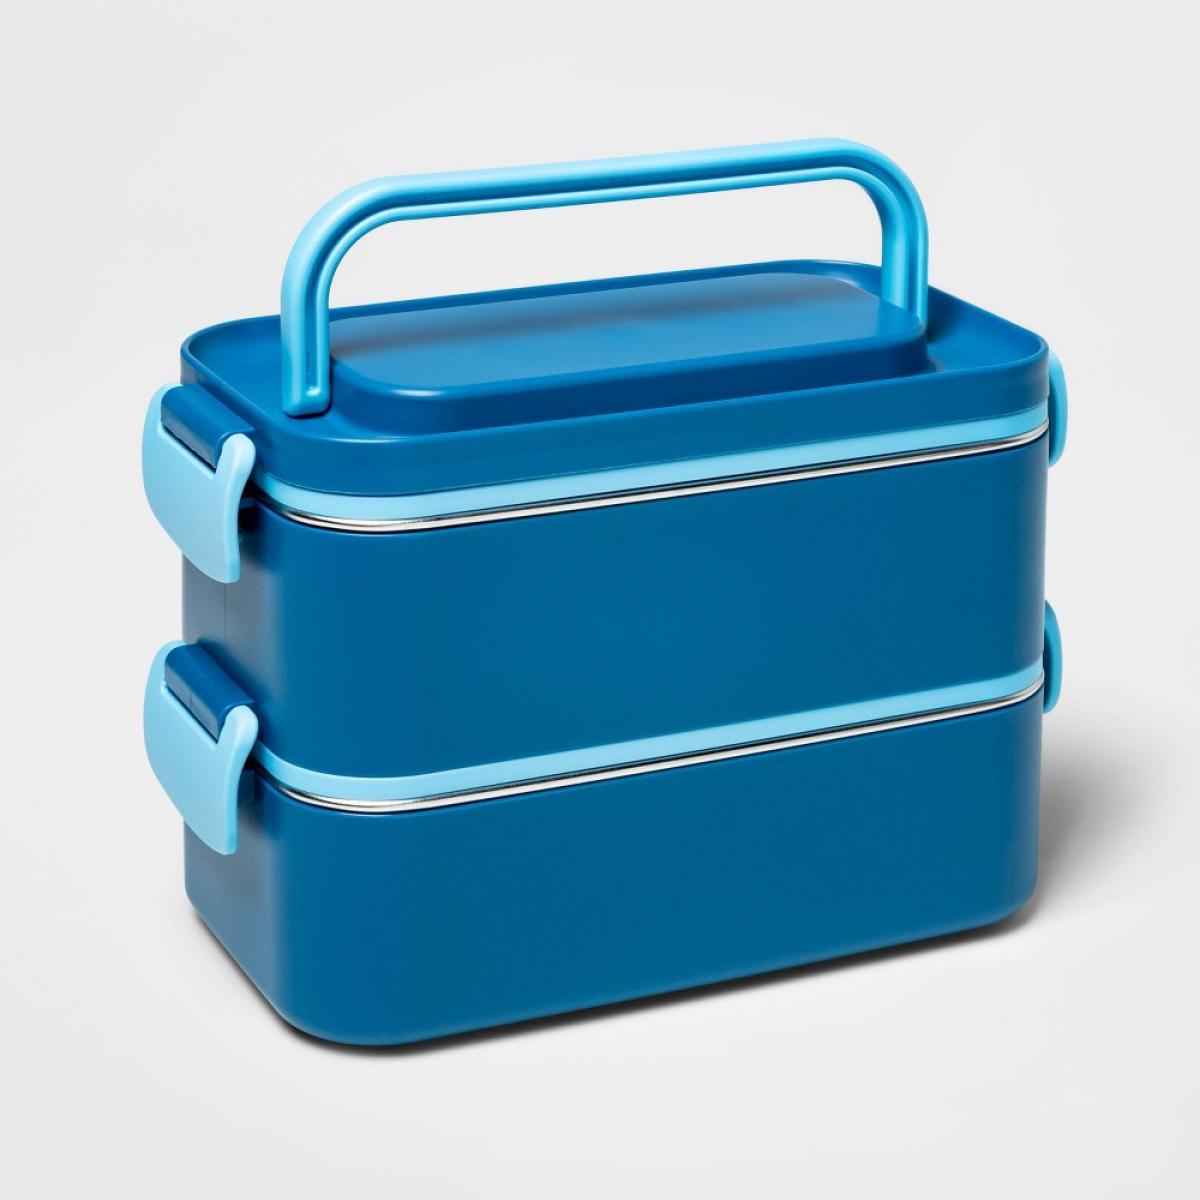 Sunhanny Bento Box Adult Lunch Box, Bento Lunch Box Containers, 50